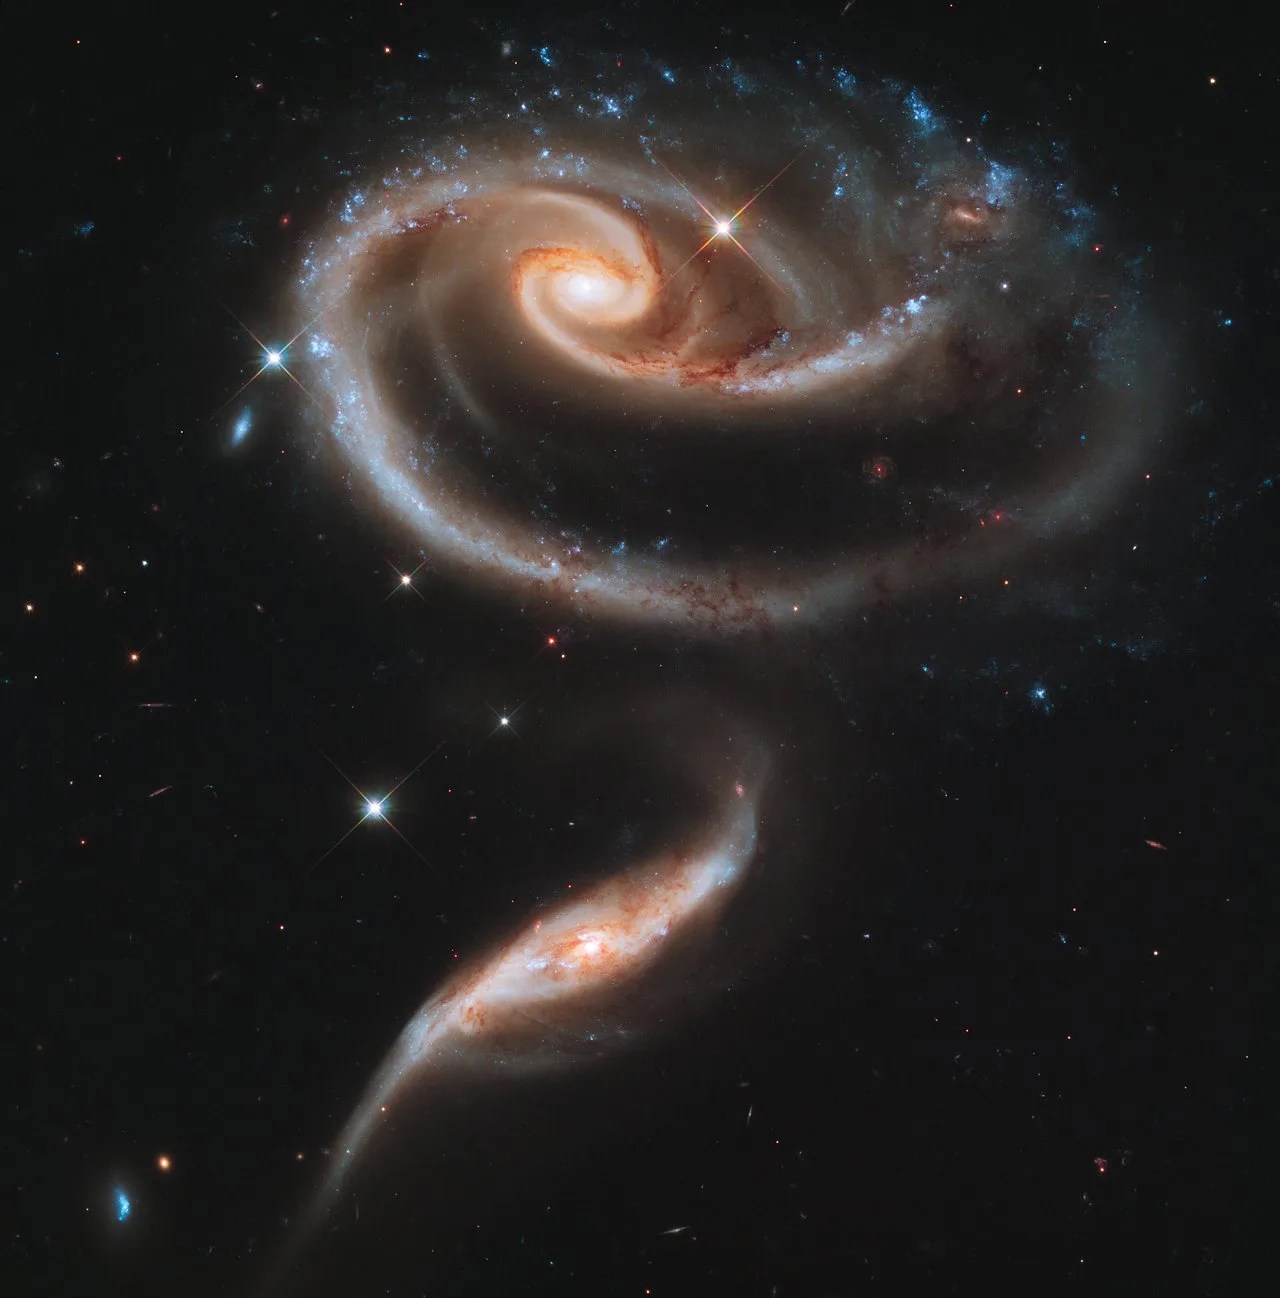 Top: a distorted spiral galaxy. One of its spiral arms extends in a sweeping arc below the galaxy. Below this spiral is another edge-on galaxy extending from the lower left toward image center.